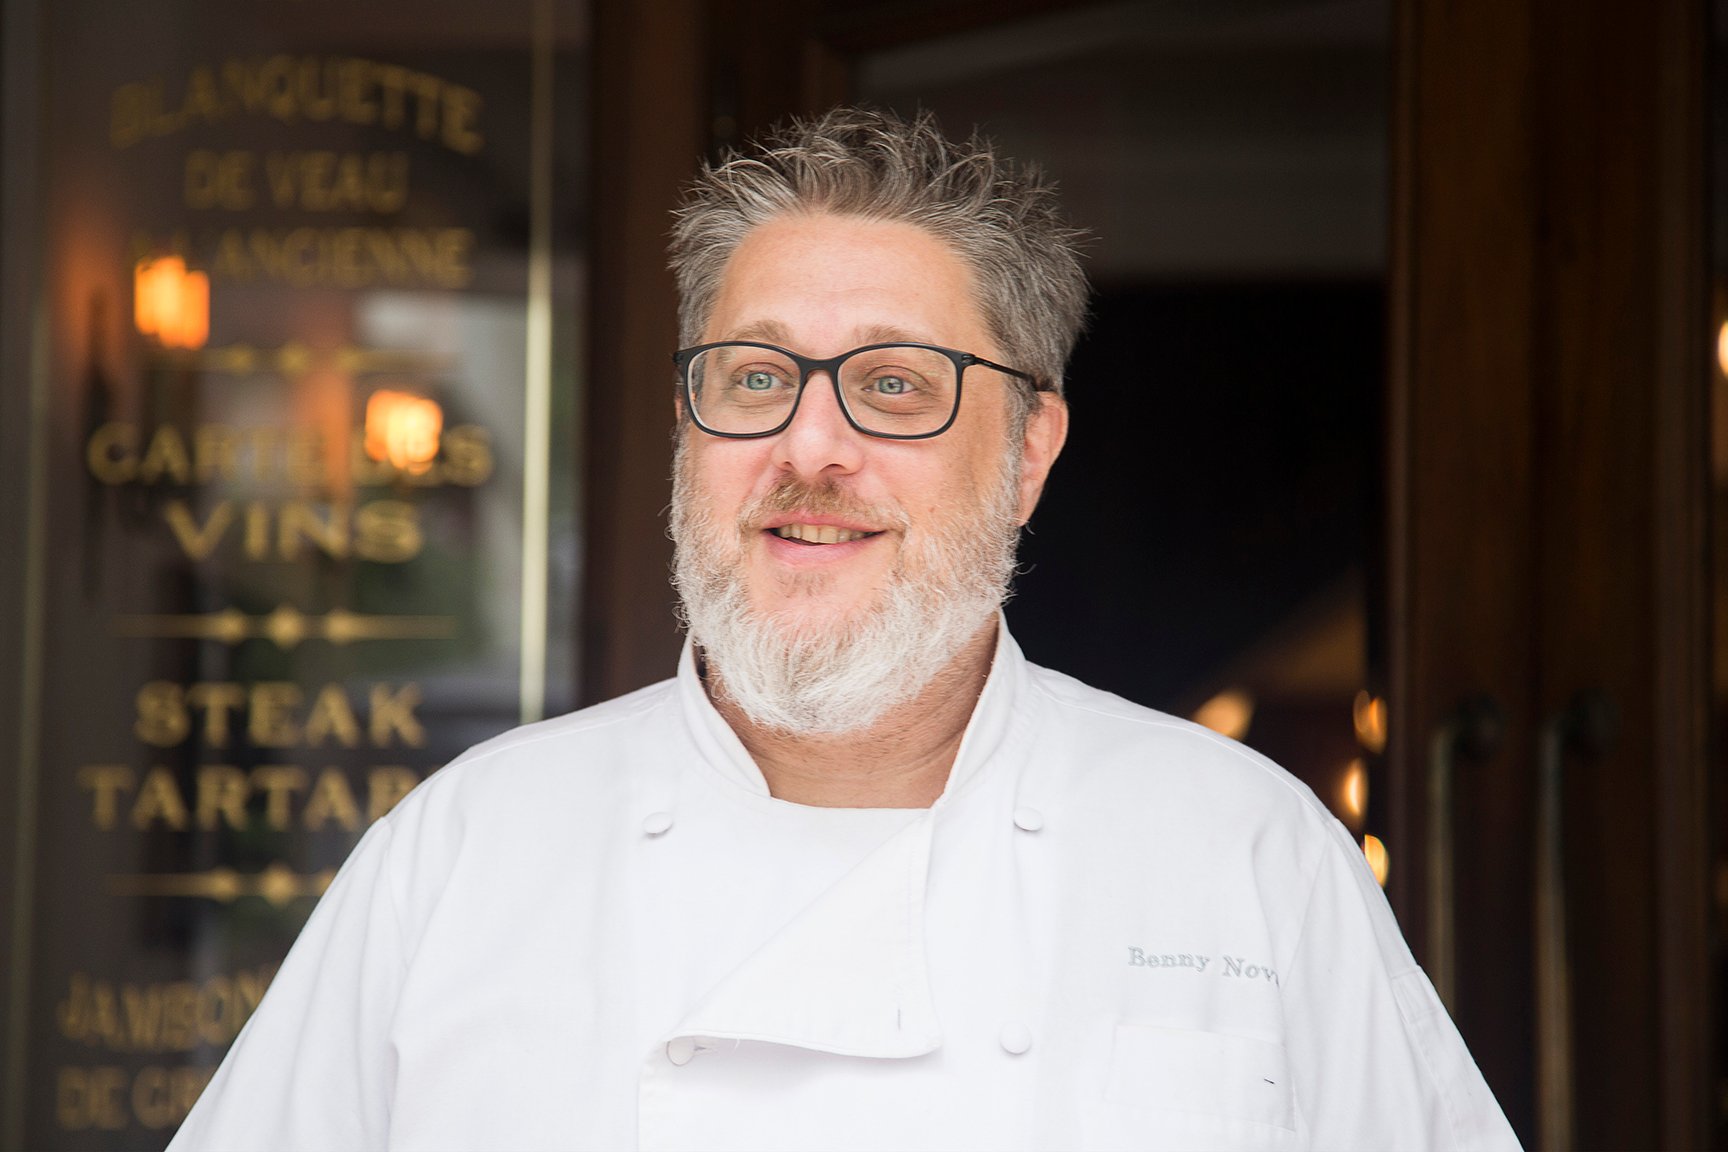 Chef Benny Novak uses techniques learned at Le Cordon Bleu in his award-winning Ici Bistrô